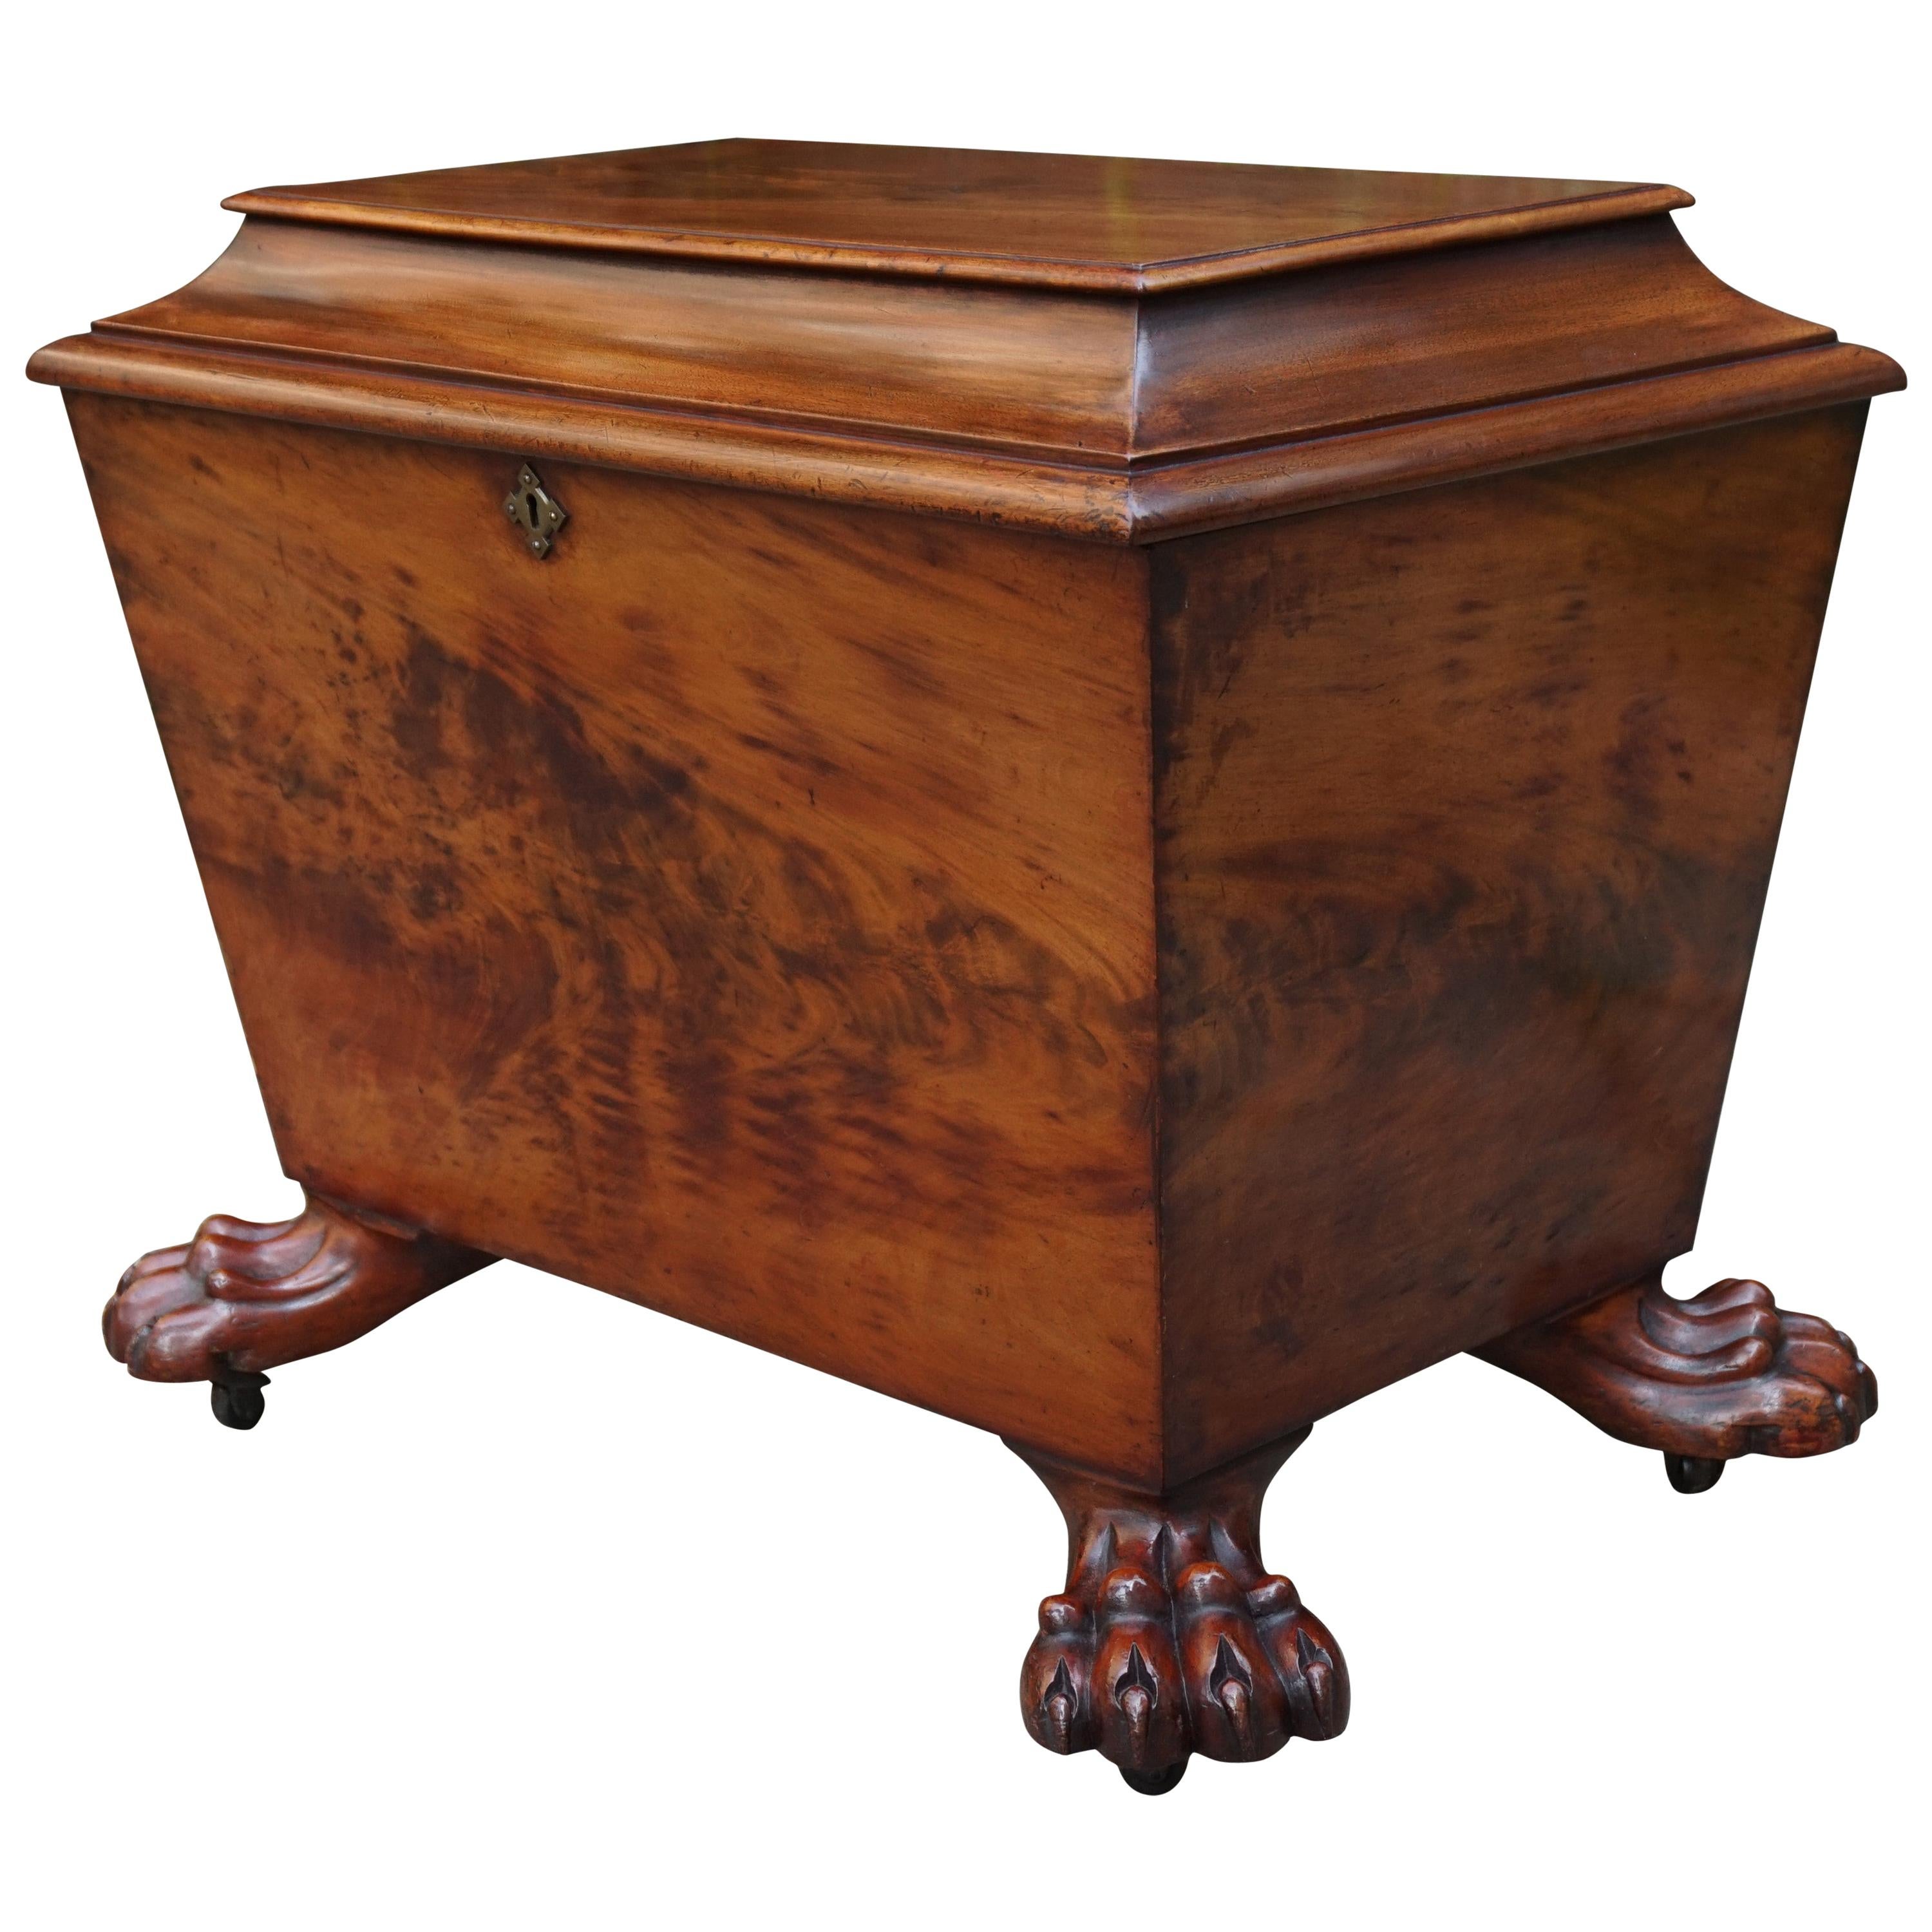 Large & Stunning Early 1800s Regency Sarcophagus Wine Cooler on Original Casters